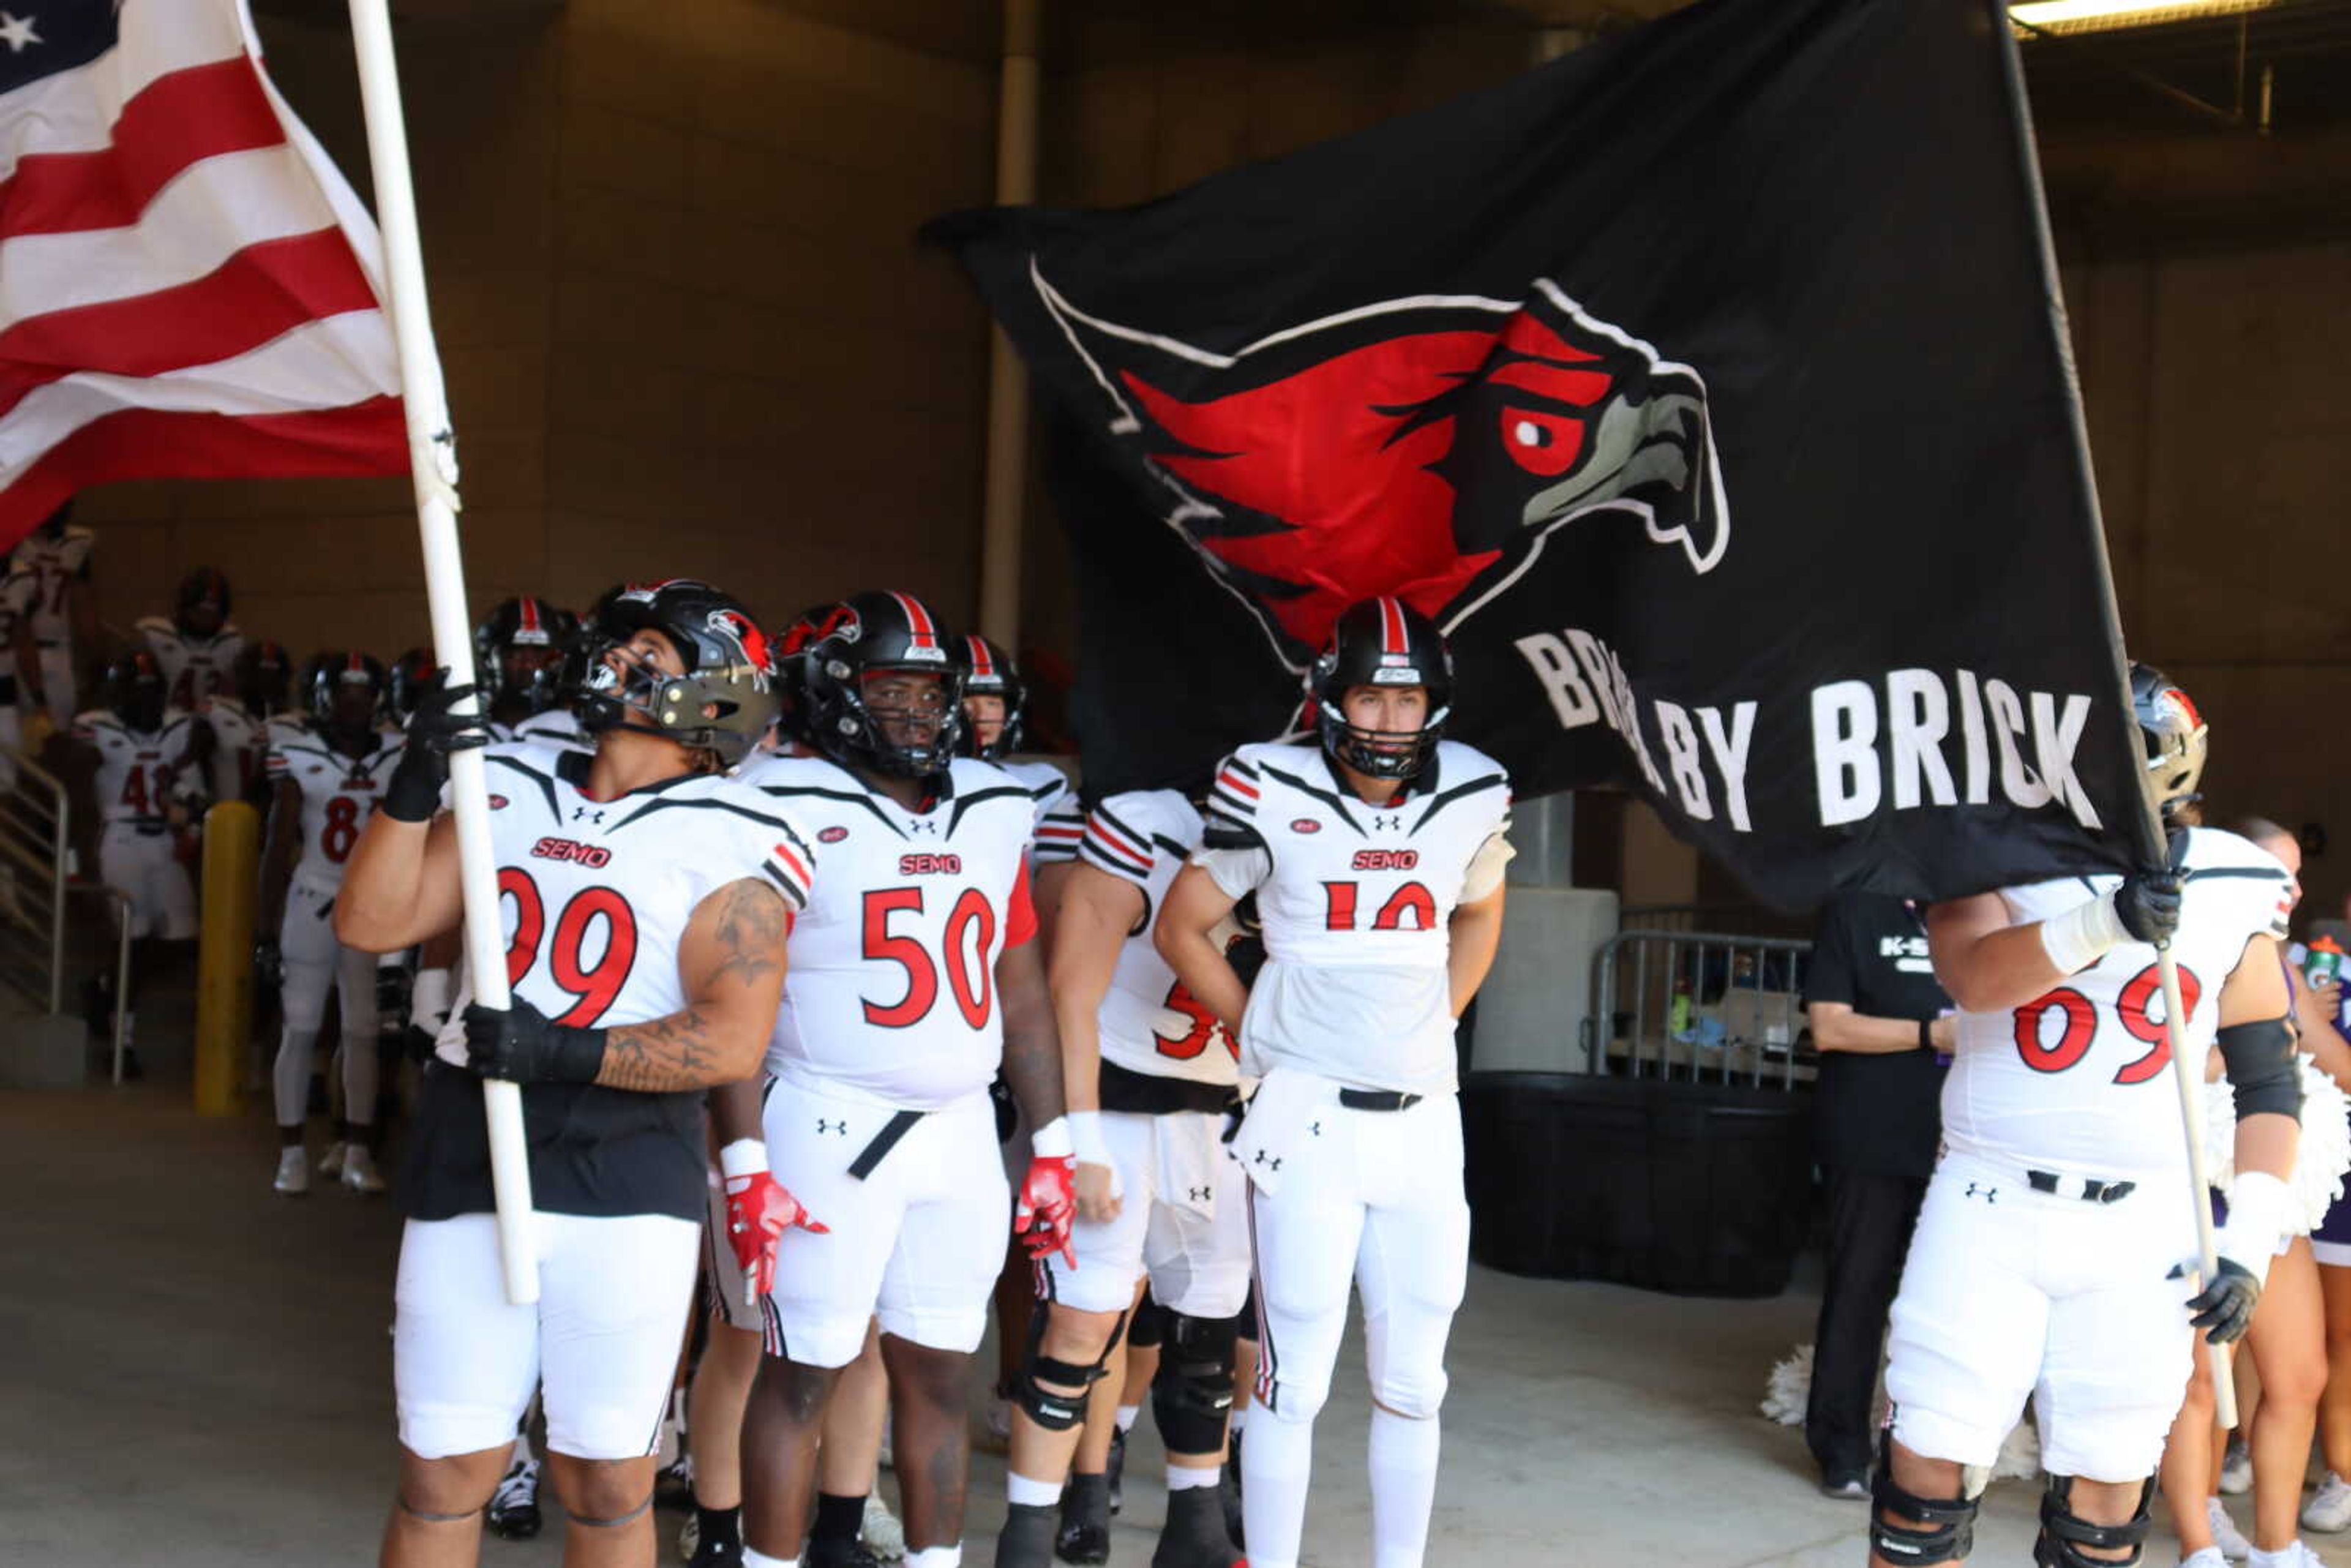 The Redhawks are lead on to the field by junior quarterback Paxton DeLaurent (10),  junior offensive lineman Kobe Sixkiller (69), and senior defensive linemen Steven Lewis (99) and Lunden Manuel (50) before their 45-0 loss against Kansas State at 6 pm on September 2 at Bill Snyder Family Stadium in Manhattan, KS.